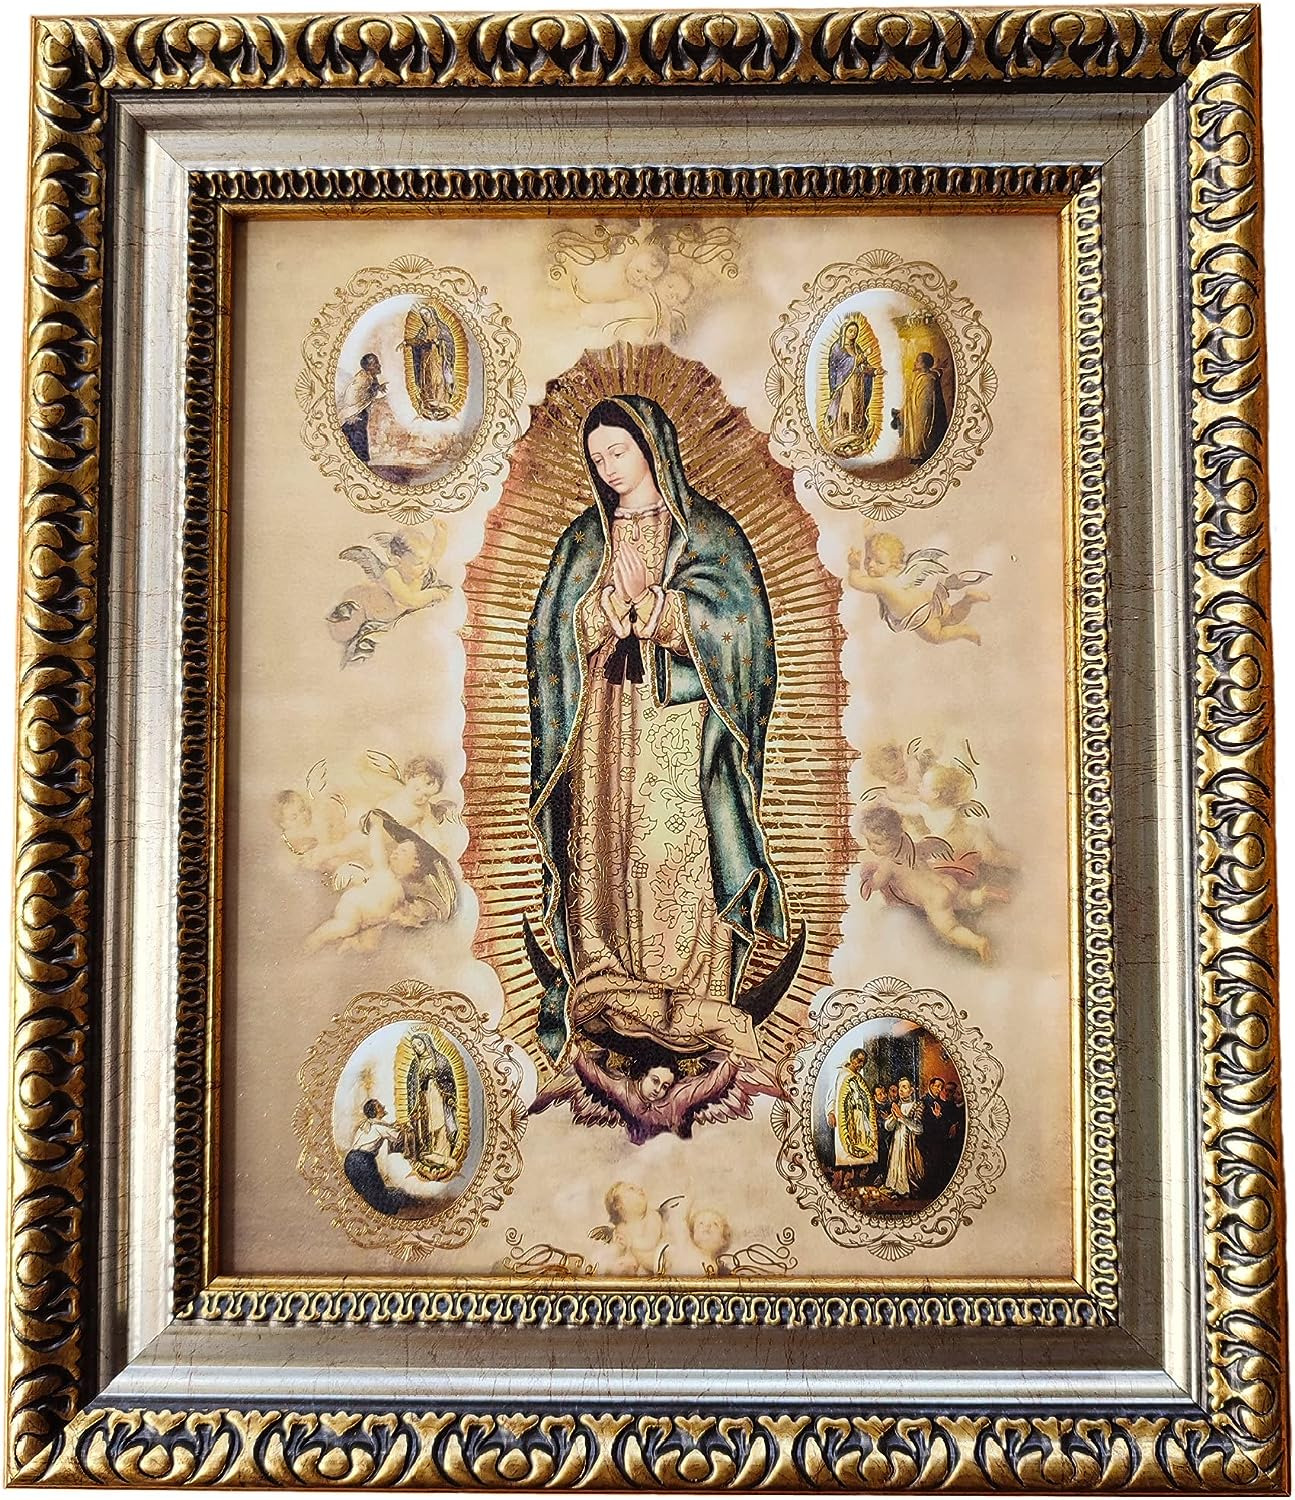 Our Lady of Guadalupe Framed Print with Apparitions to Saint Juan Diego New